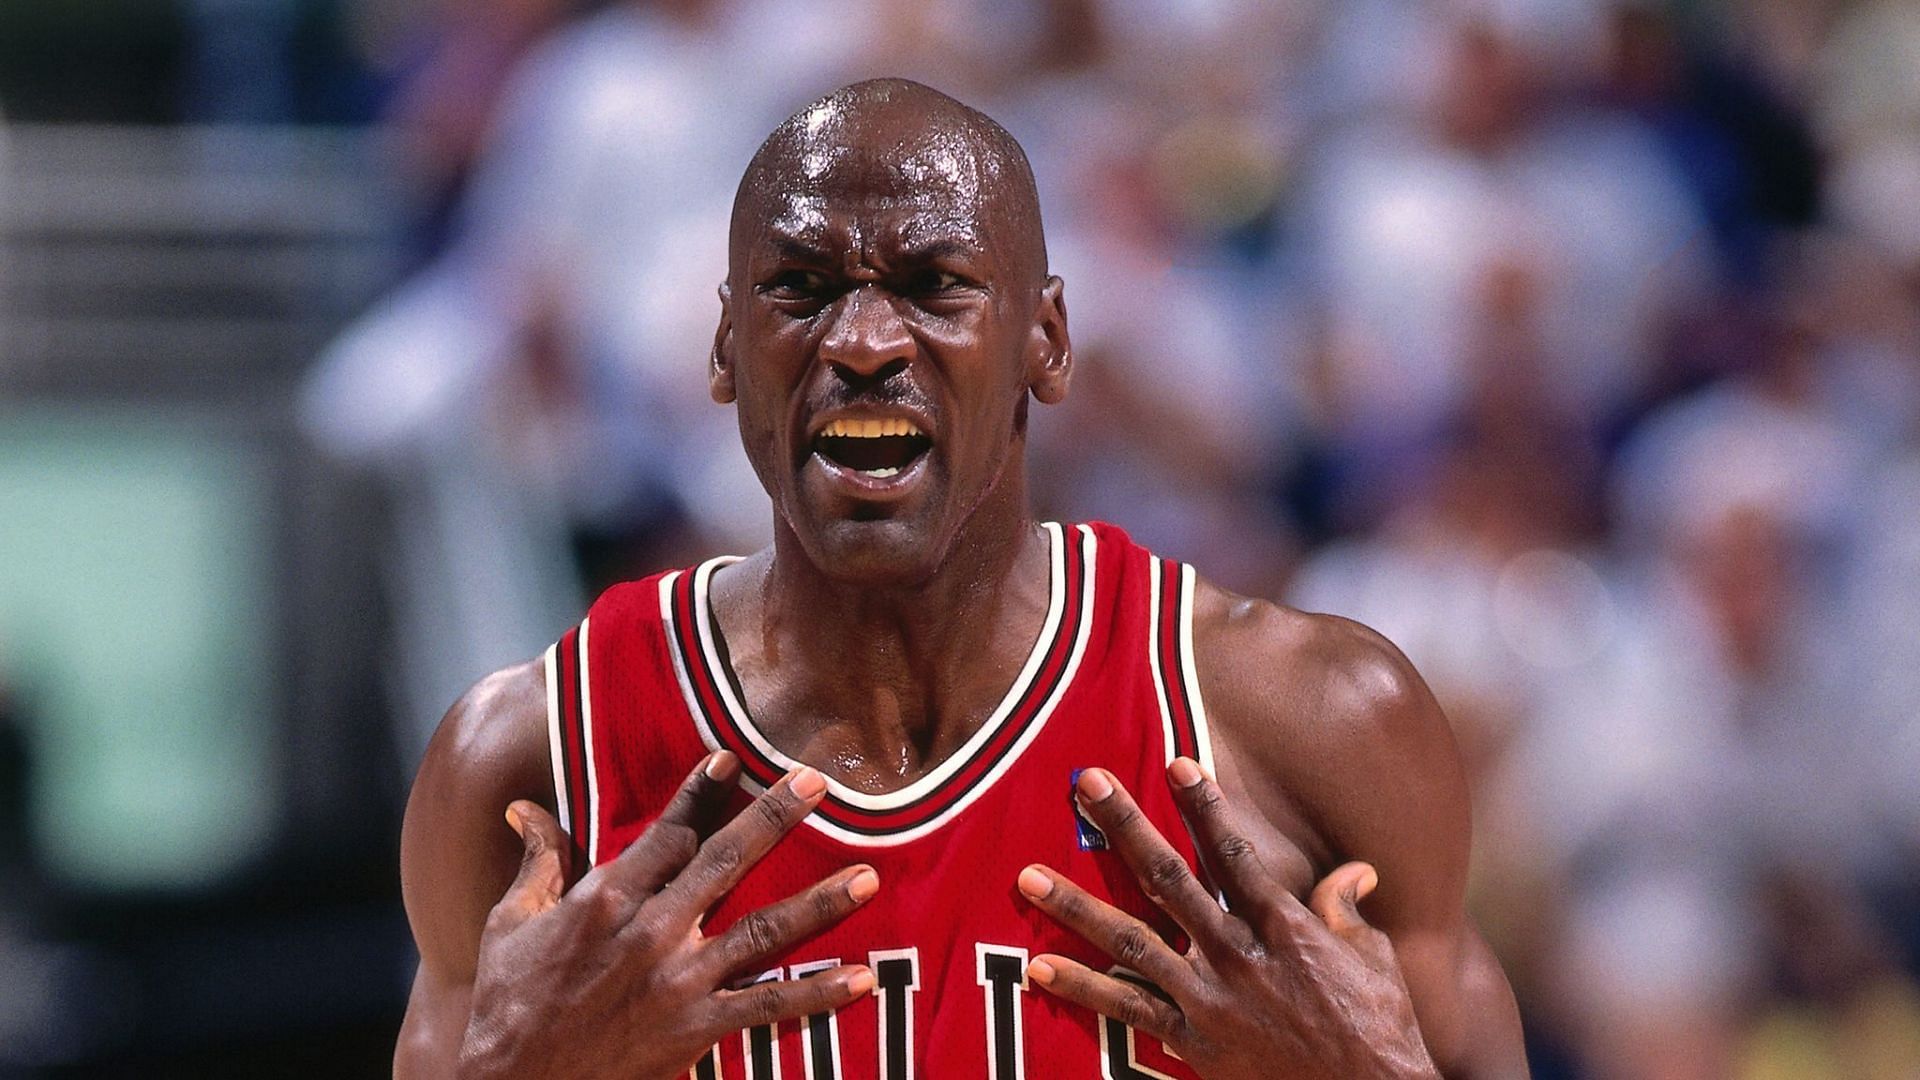 Michael Jordan displayed his fiery competitive nature throughout his NBA career. [Photo: Essentially Sports]